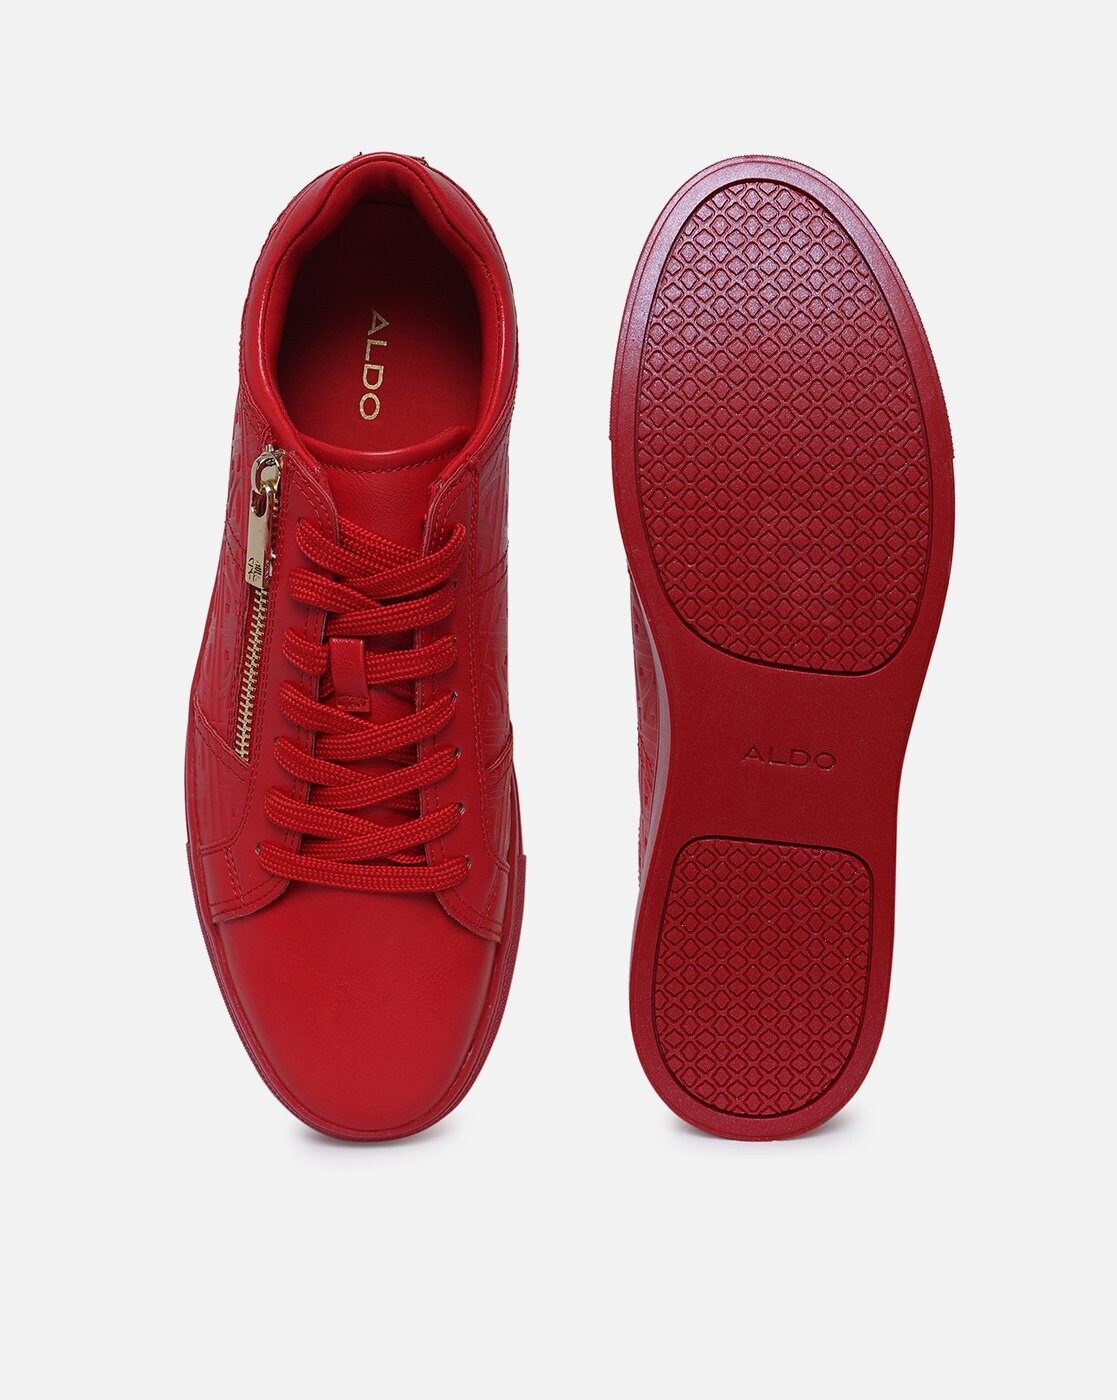 Club Aldo Womens Clubaldo,Fashion Sneakers WMNS Flat Shoes, Color Red, Size  38 EU: Buy Online at Best Price in Egypt - Souq is now Amazon.eg